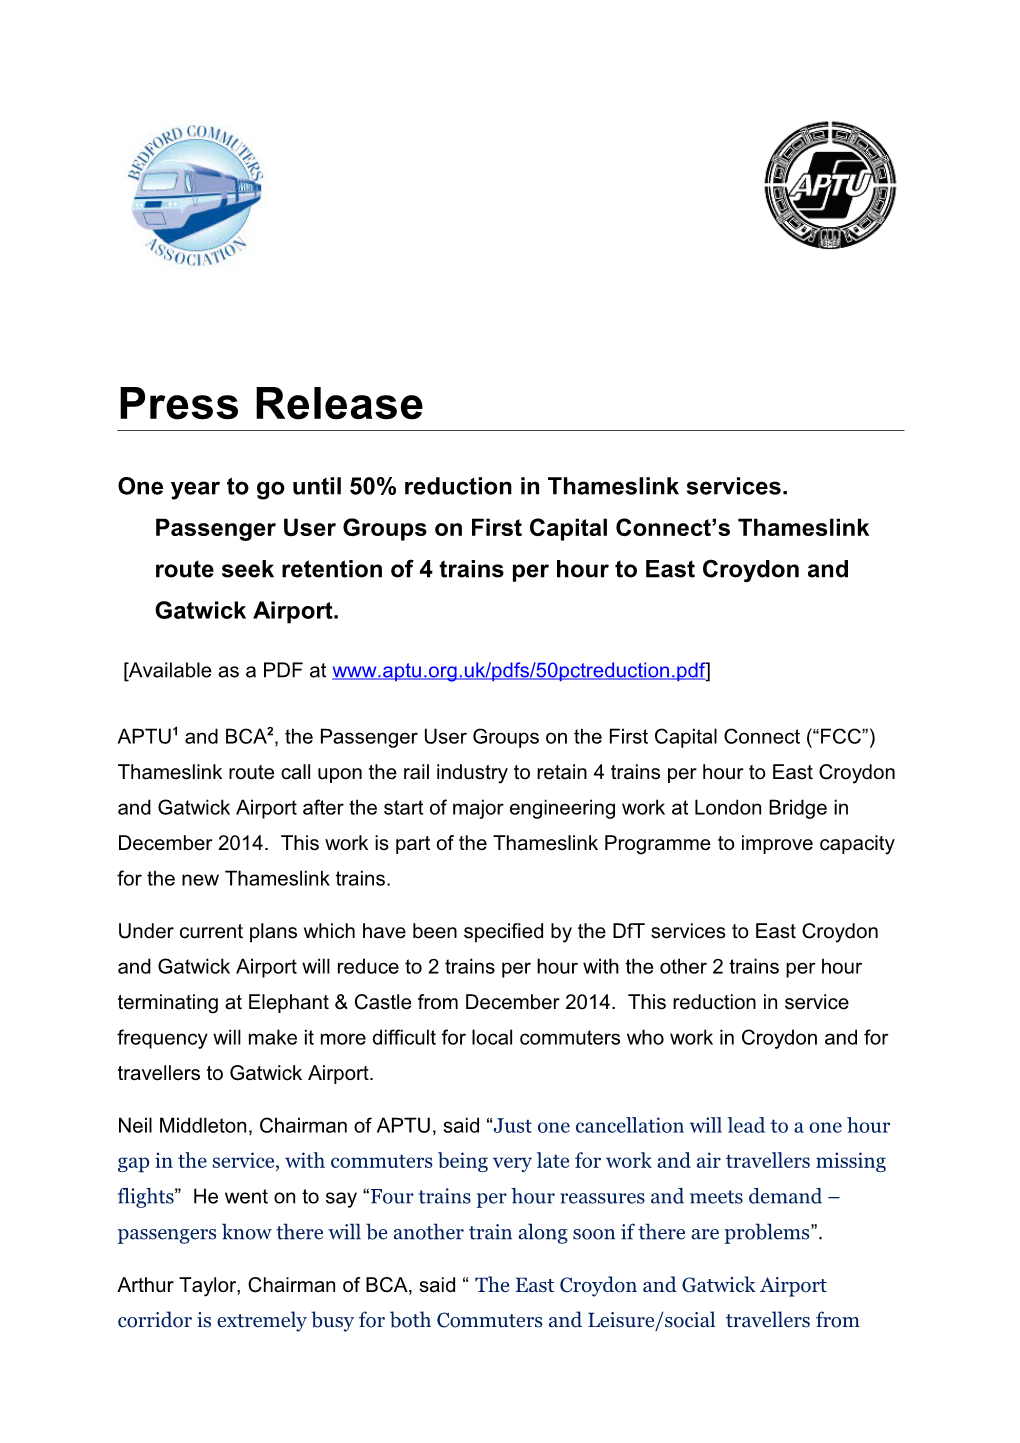 One Year to Go Until 50% Reduction in Thameslink Services. Passenger User Groups on First